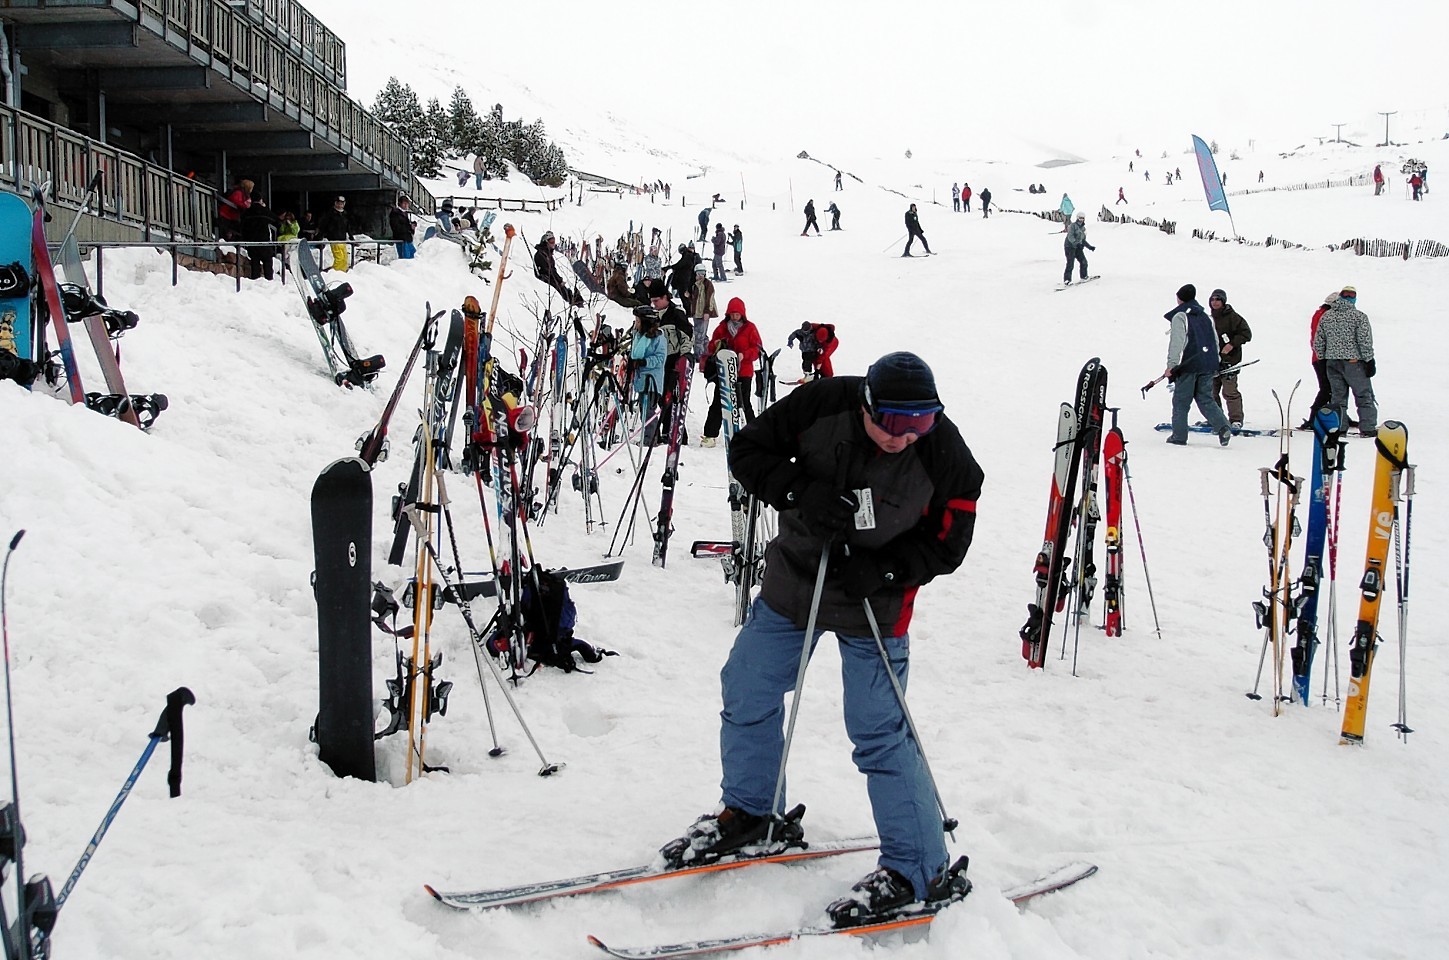 Skiing at the Cairngorm Ski Resort.Picture by Gordon Lennox